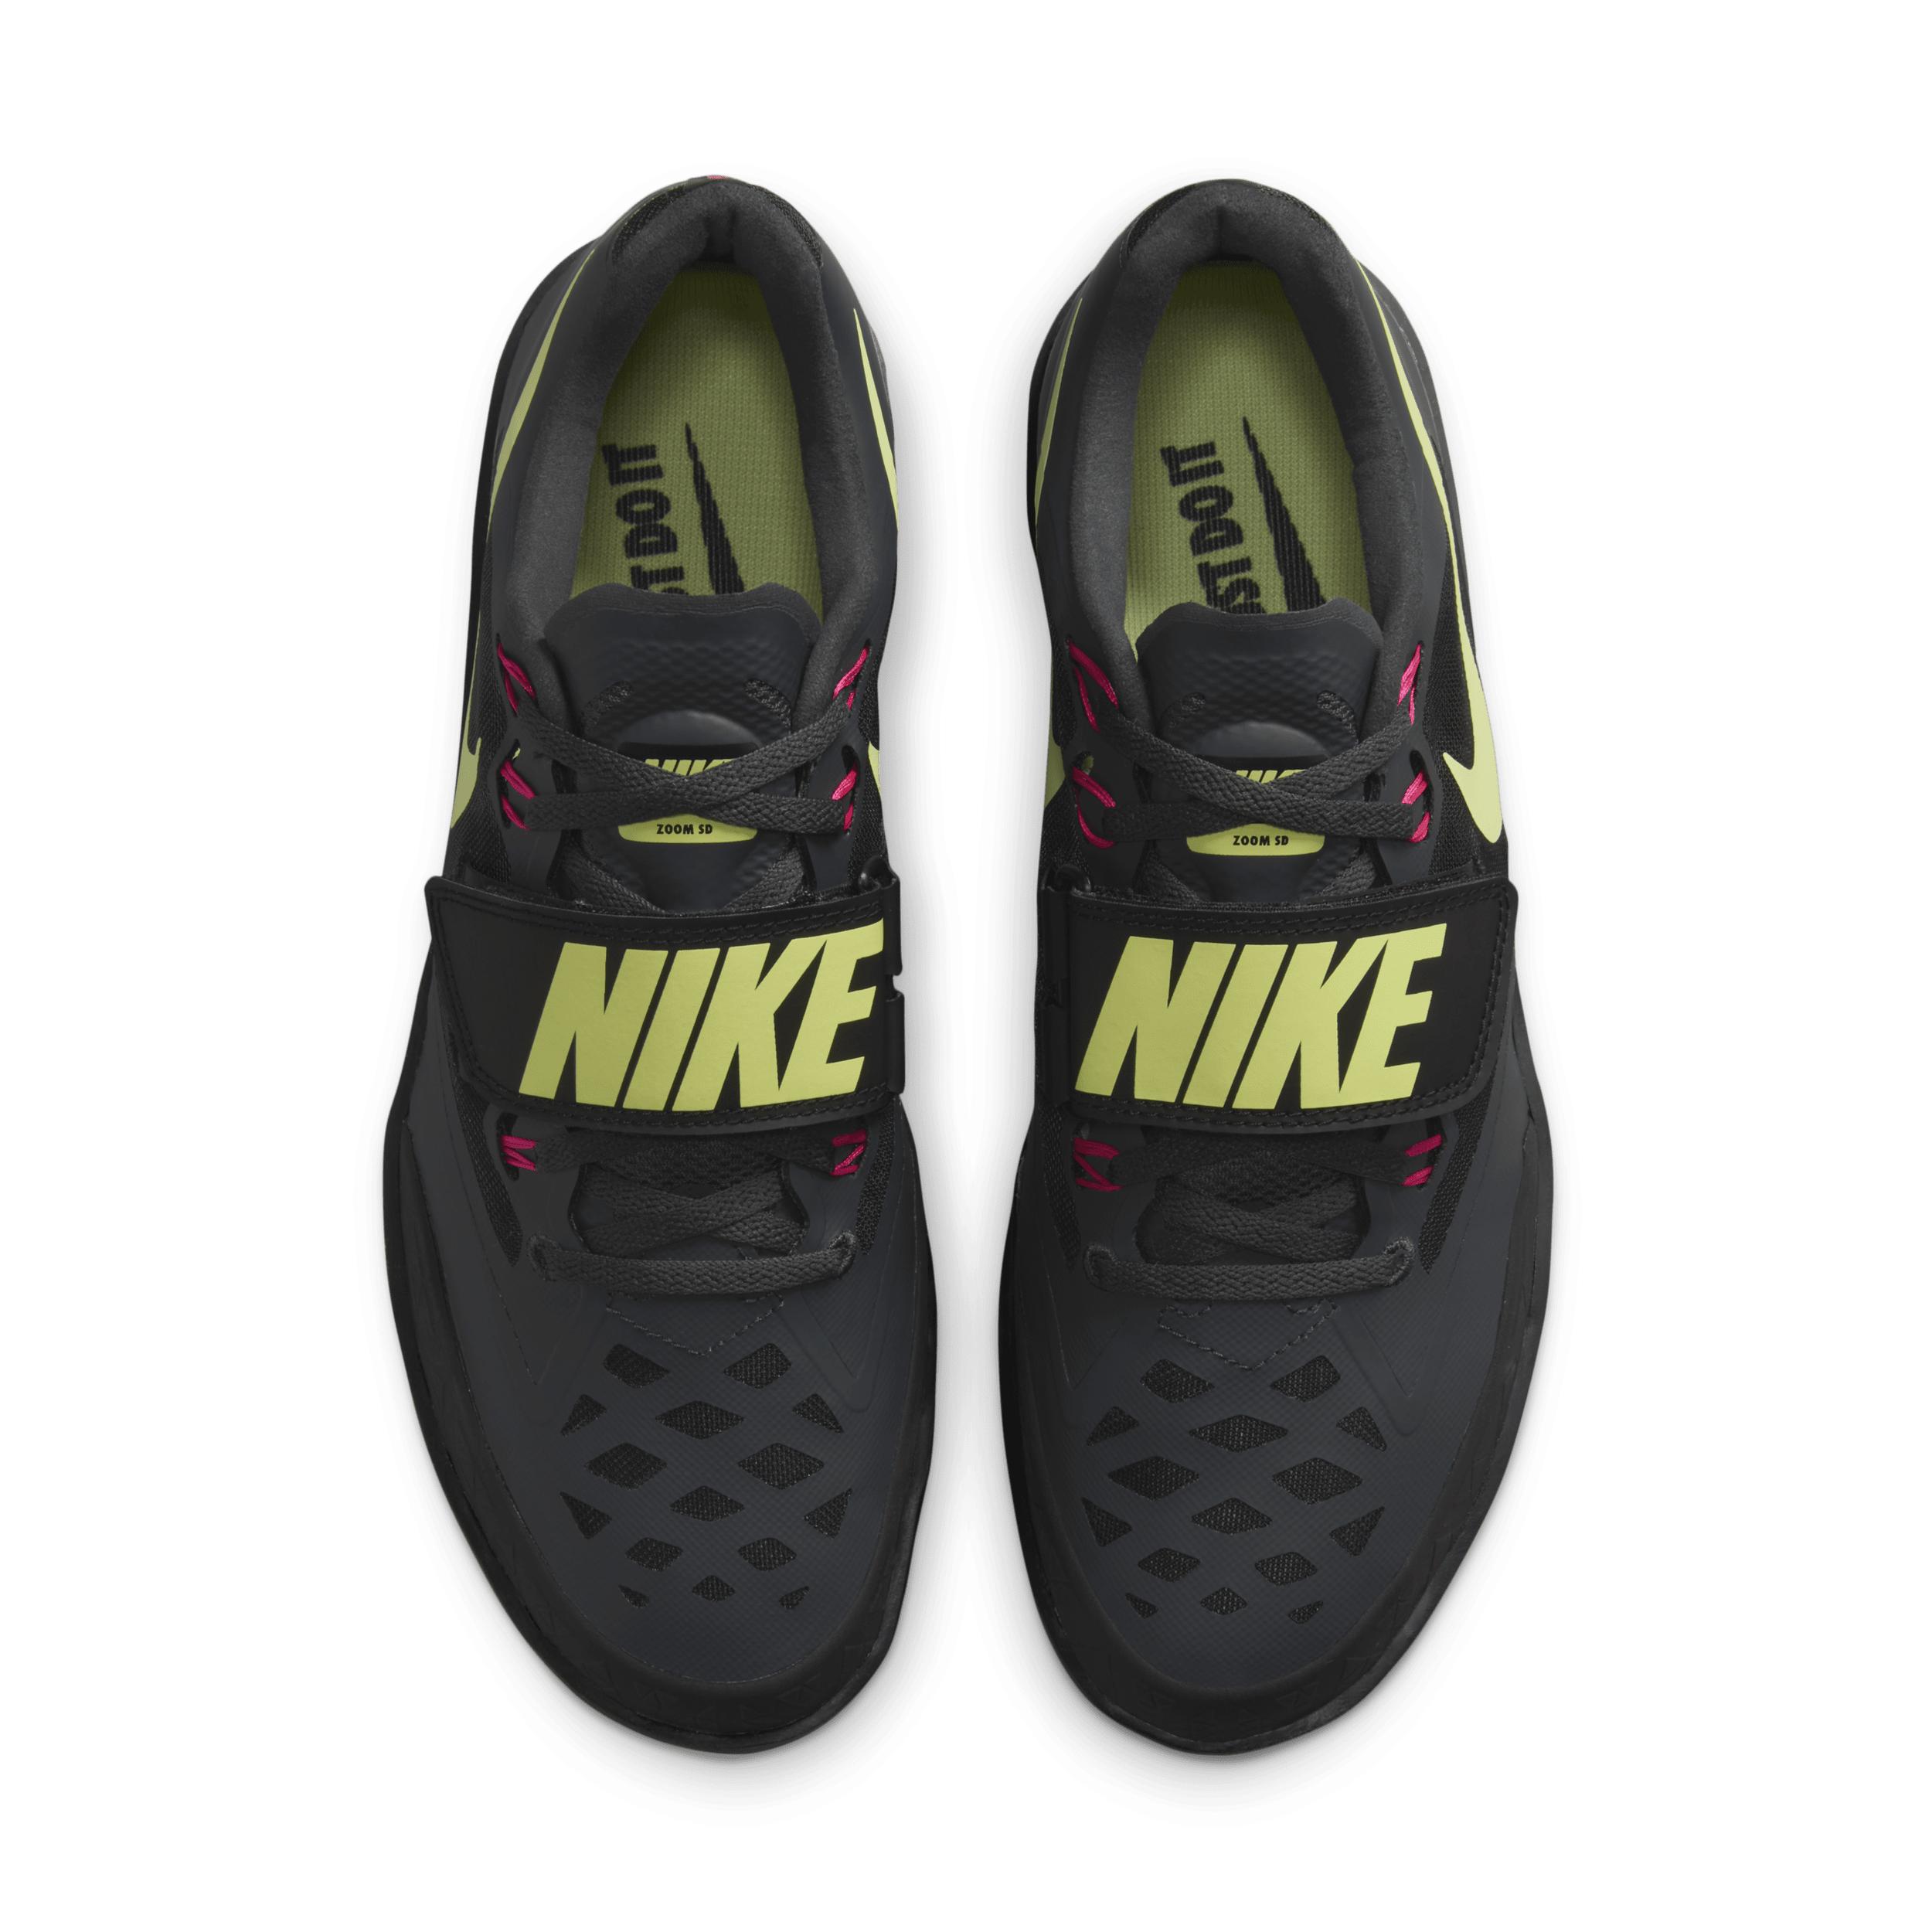 Nike Zoom Sd 4 Athletics Throwing Shoes in Black | Lyst UK